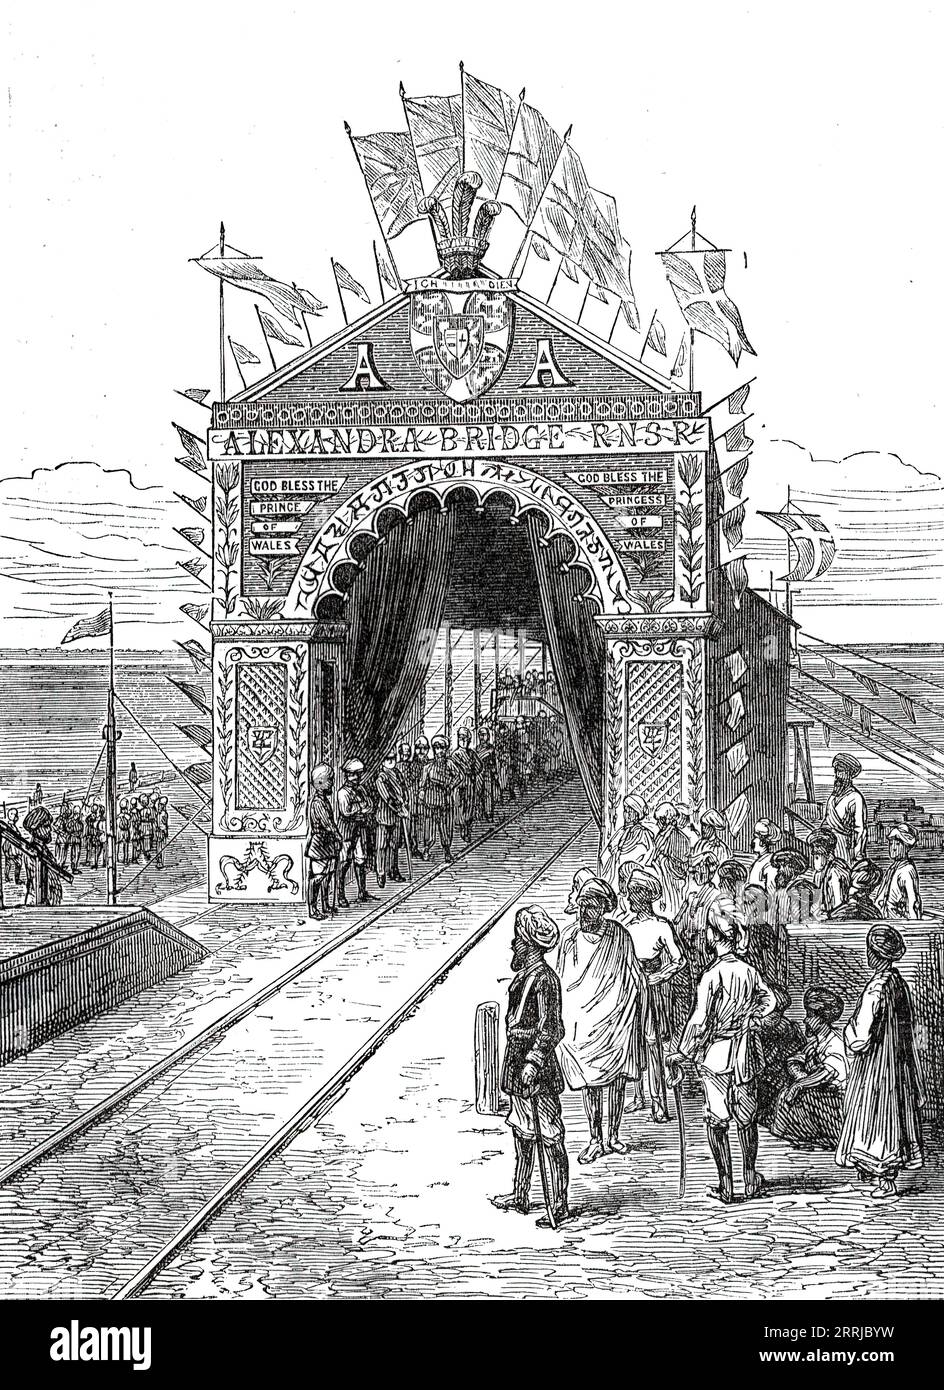 Triumphal Arch on the Alexandra Railway Bridge at Wuzeerabad, from a sketch by one of our special artists,  1876. 'The Prince [of Wales, future King Edward VII) was accompanied by some of the Maharajah's courtiers and nobles...proceeded to Wuzeerabad [Wazirabad], where the Prince was to perform the ceremony of completing and opening the &quot;Alexandra&quot; bridge of the Punjaub Northern State Railway. This railway-bridge over the Chenab has been constructed under the superintendence of Mr. Alexander Grant, C.E., engineeer-in-chief, and Mr. Henry Lambert, executive engineer. It was commenced Stock Photo